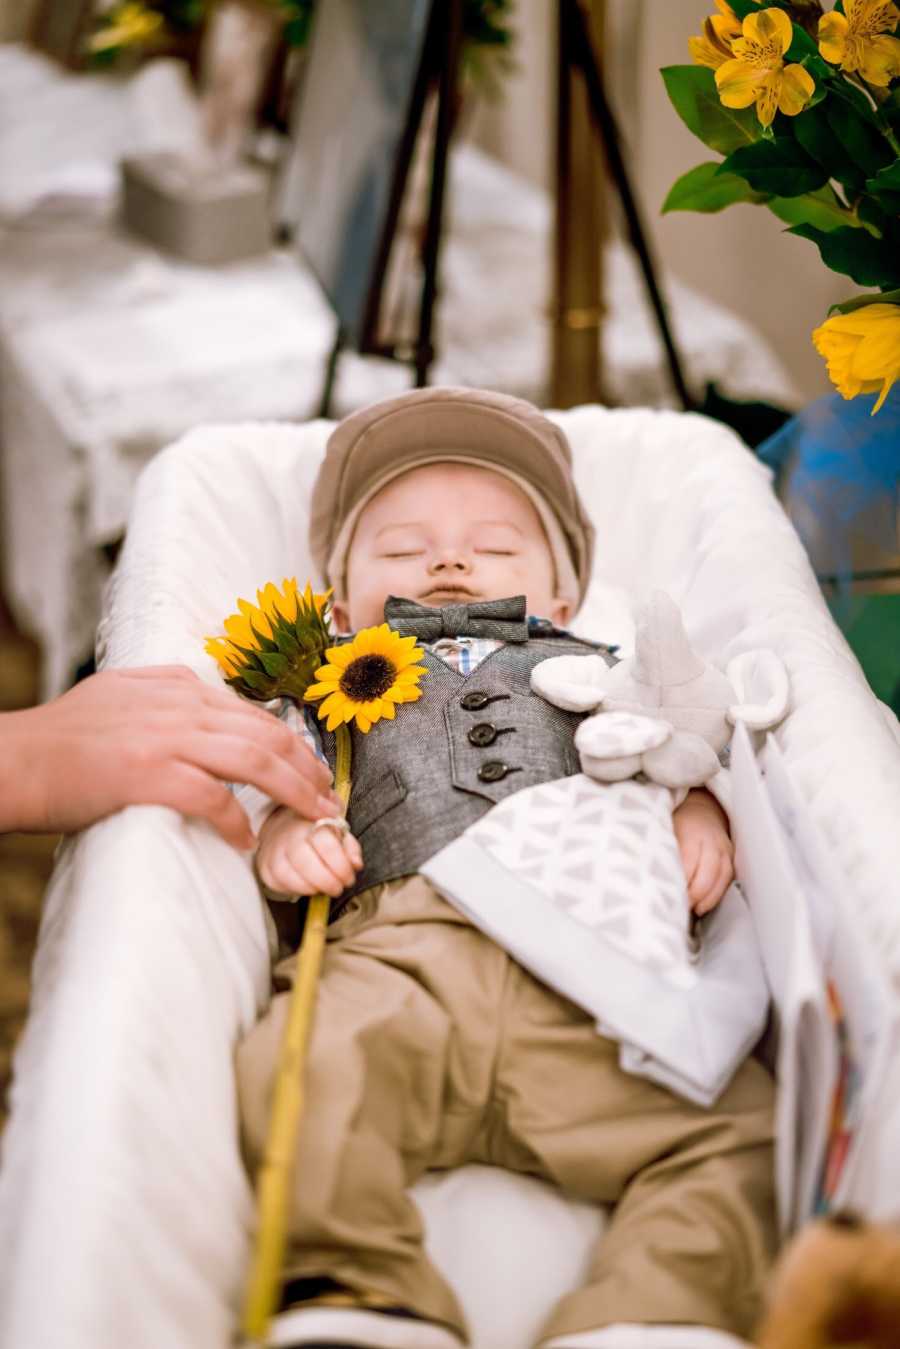 Deceased 8 month laying in coffin holding onto blanket and sunflower